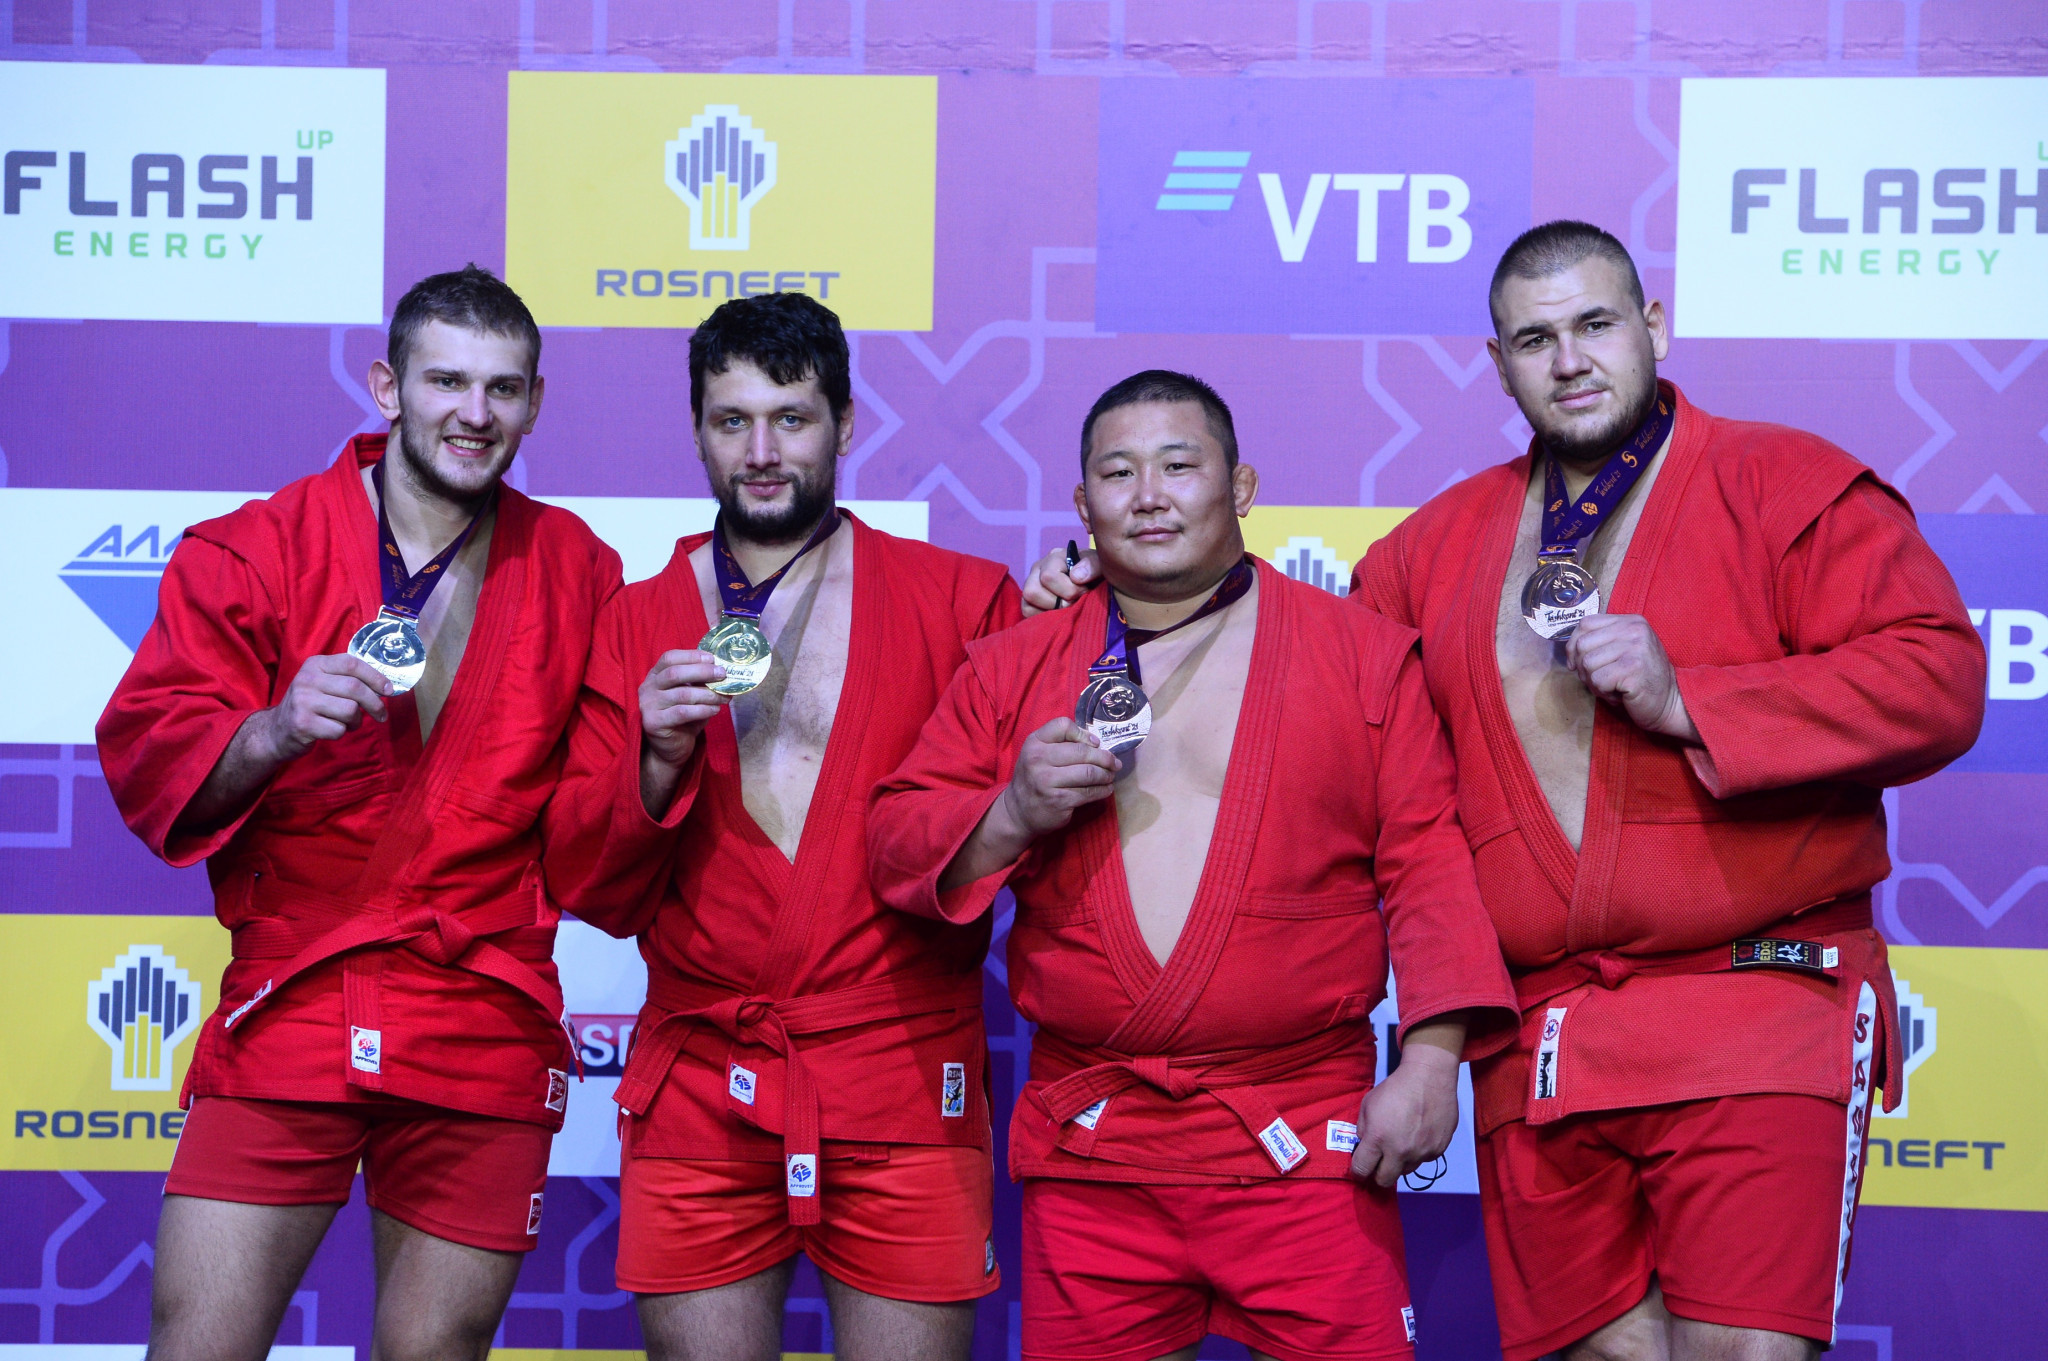 Artem Osipenko, second in from left, claimed his ninth world title of his career ©FIAS